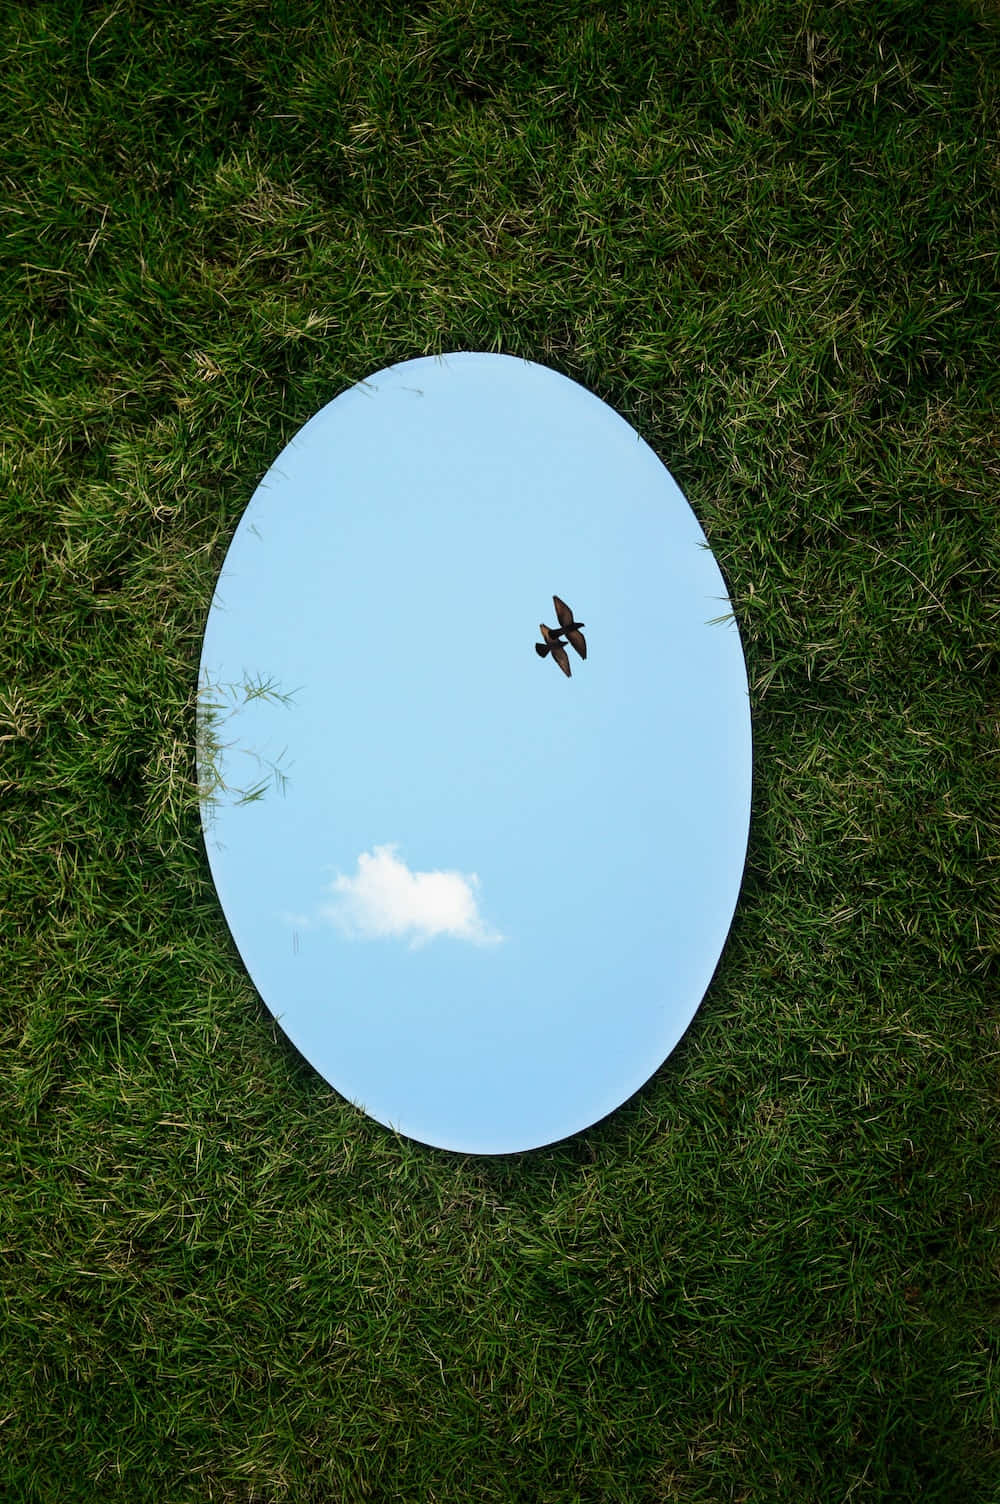 Blue Sky Round Mirror Reflection Picture